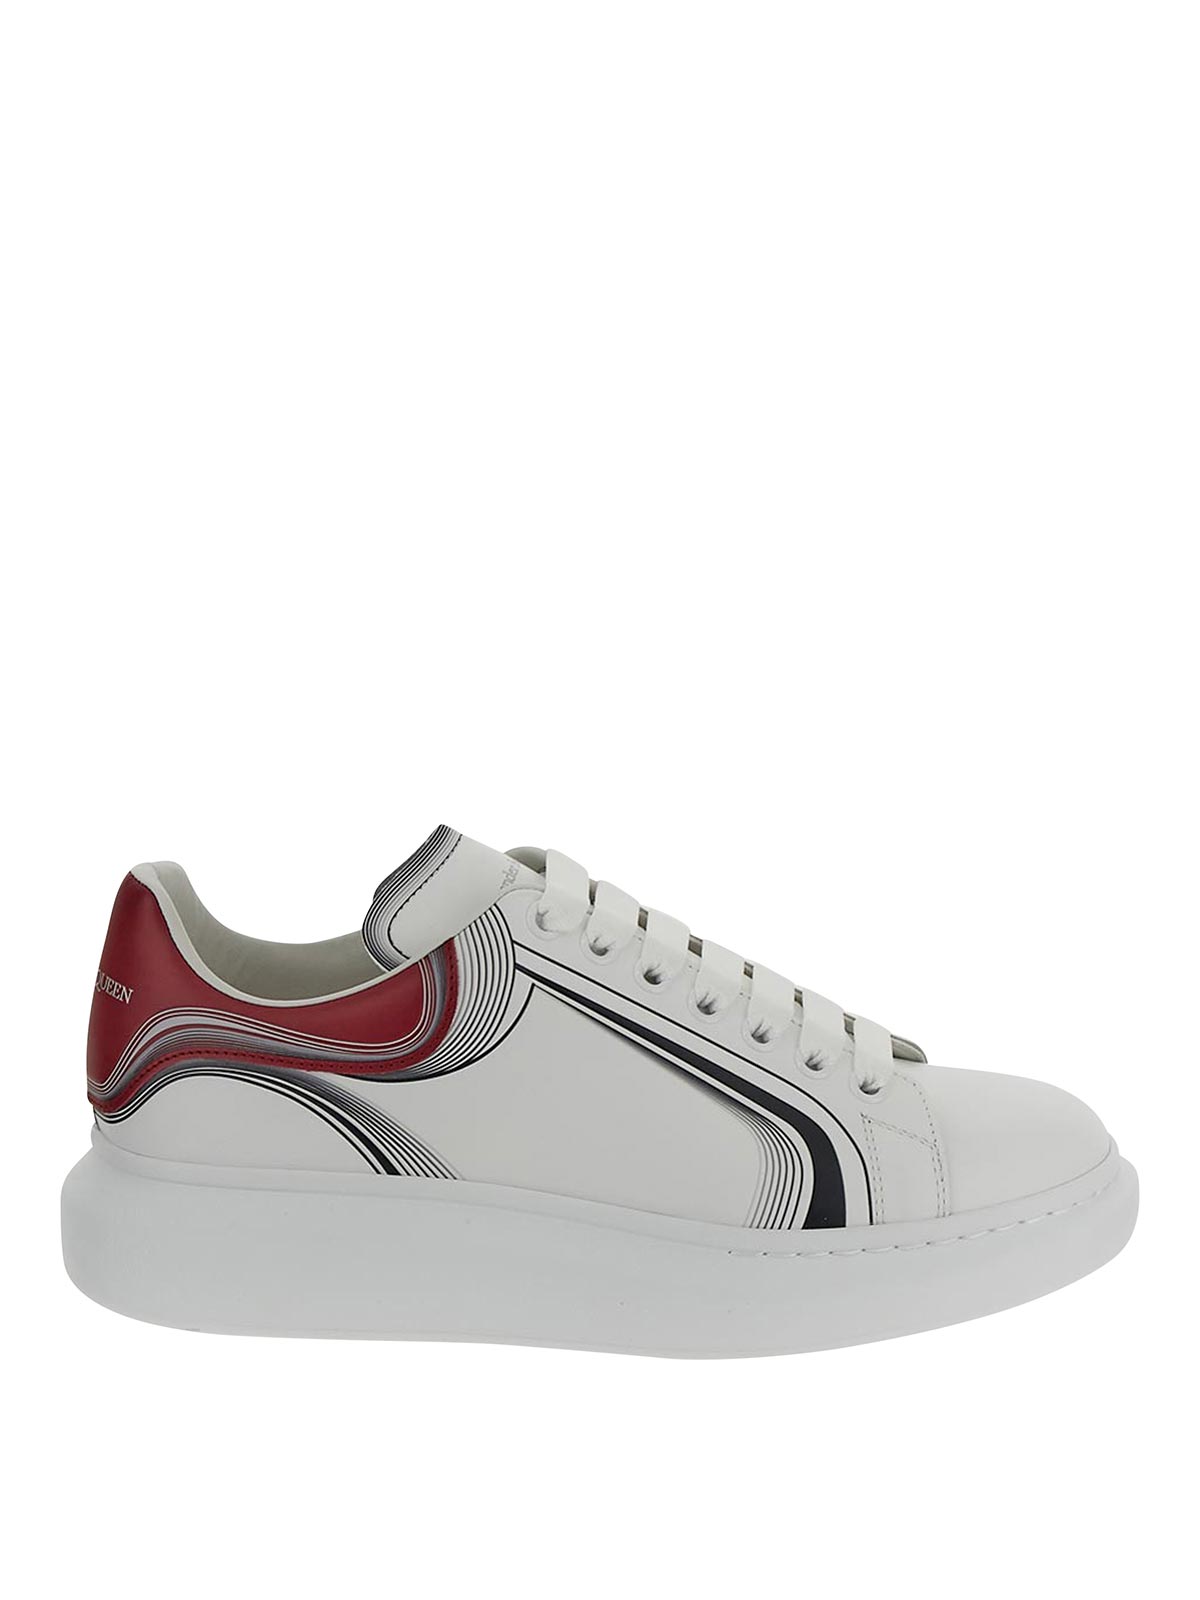 Alexander McQueen Women's Larry White And Red Sneakers New Size 41 US 11 |  eBay